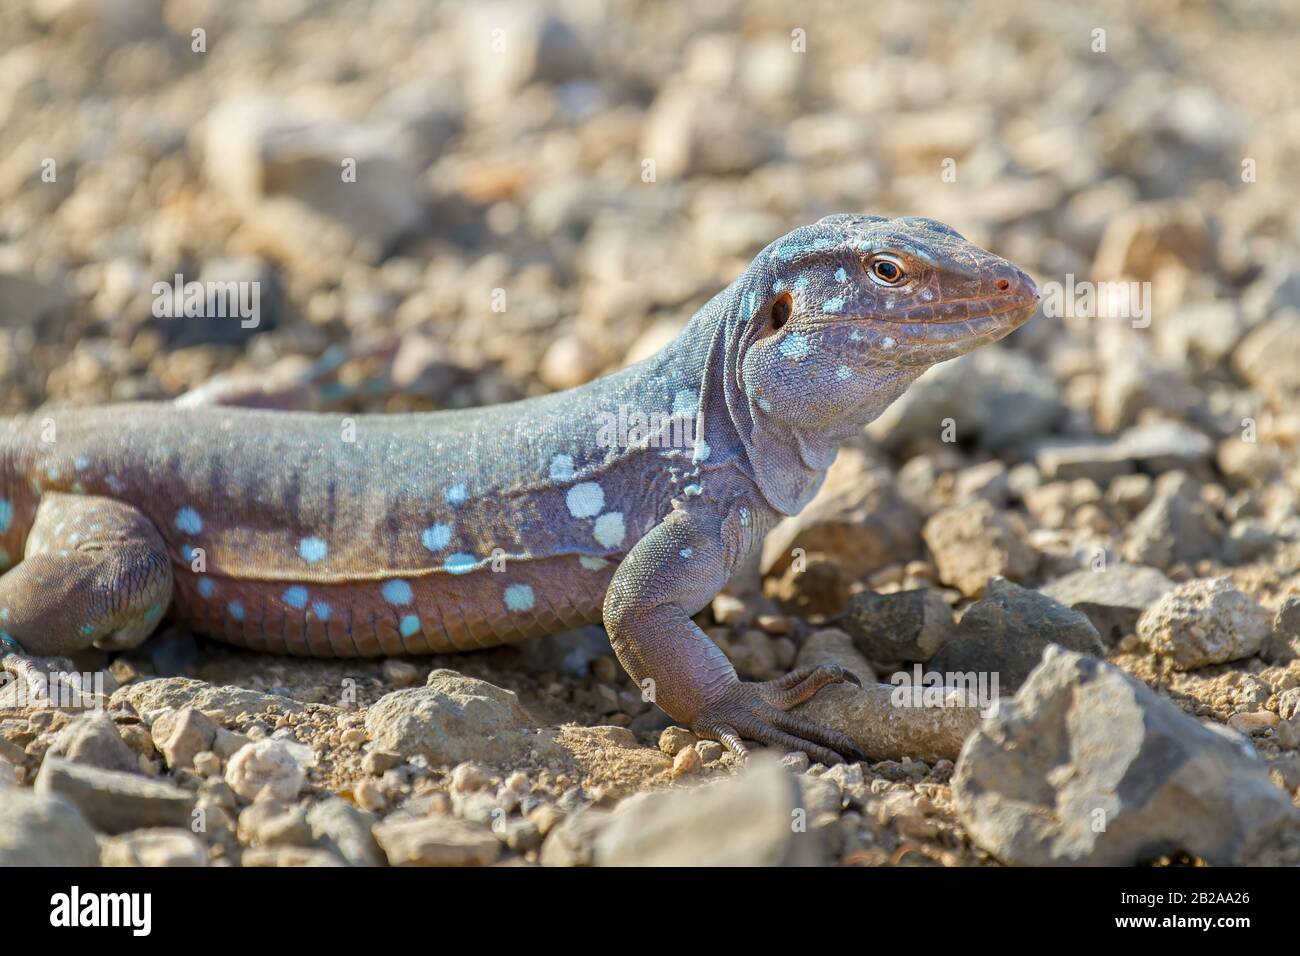 Close up whiptail lizard on ground with stones Stock Photo